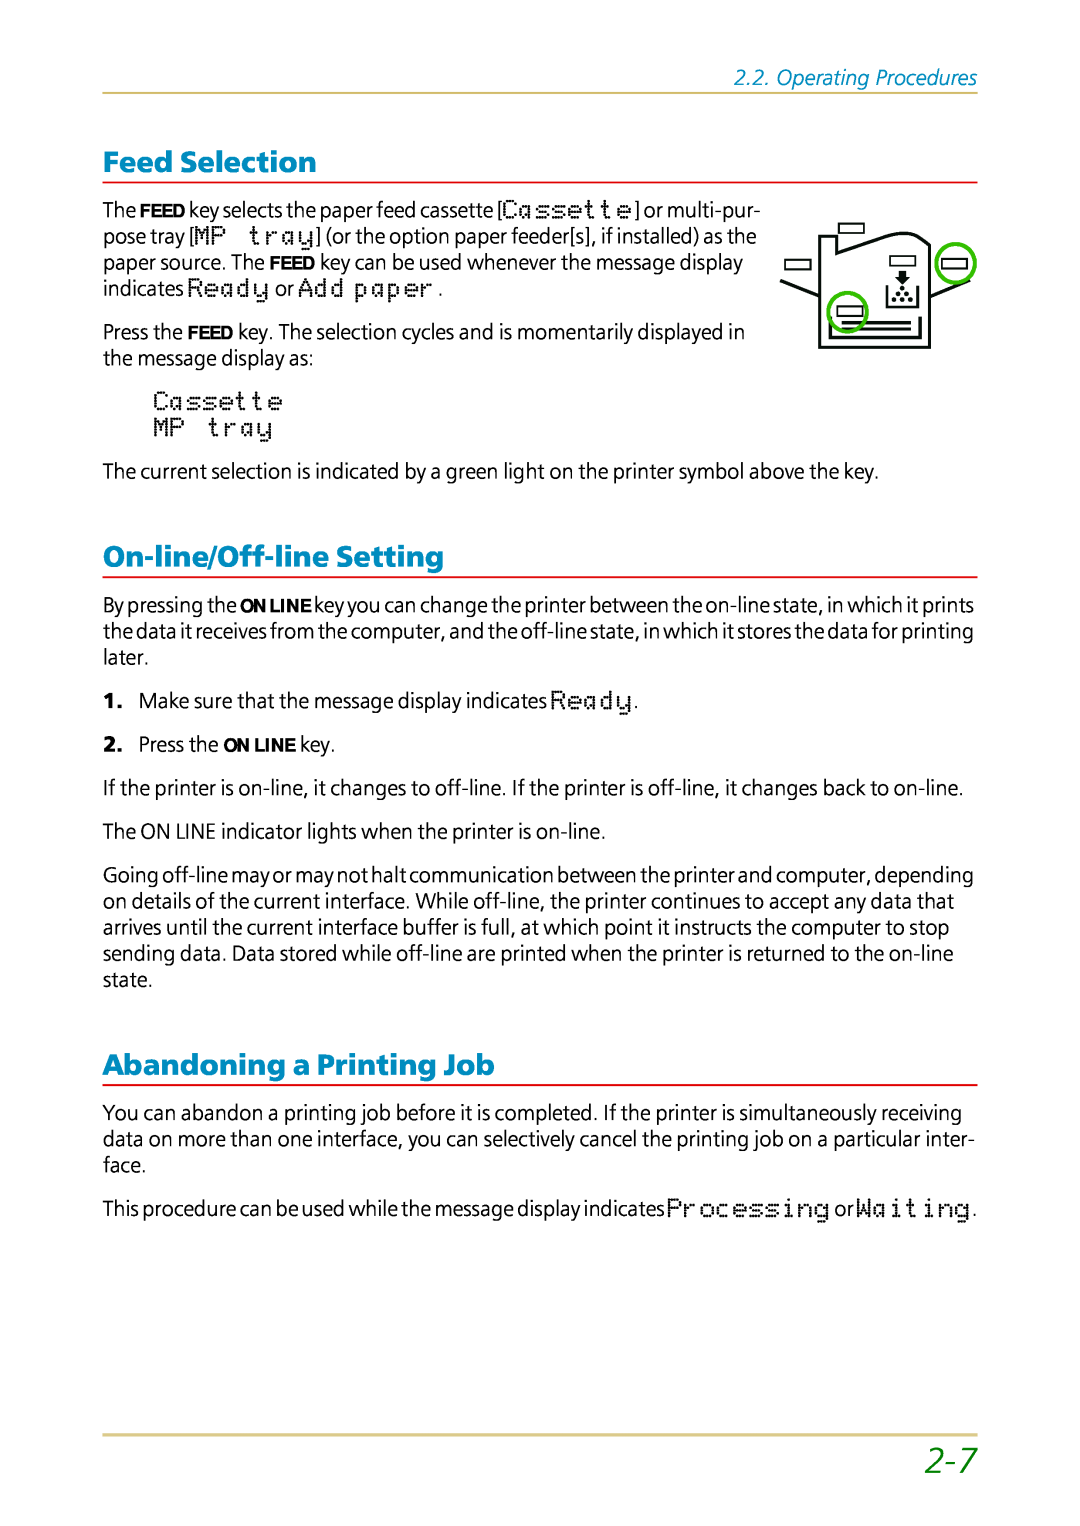 Kyocera FS-1700 user manual Feed Selection, On-line/Off-lineSetting, Abandoning a Printing Job, Operating Procedures 